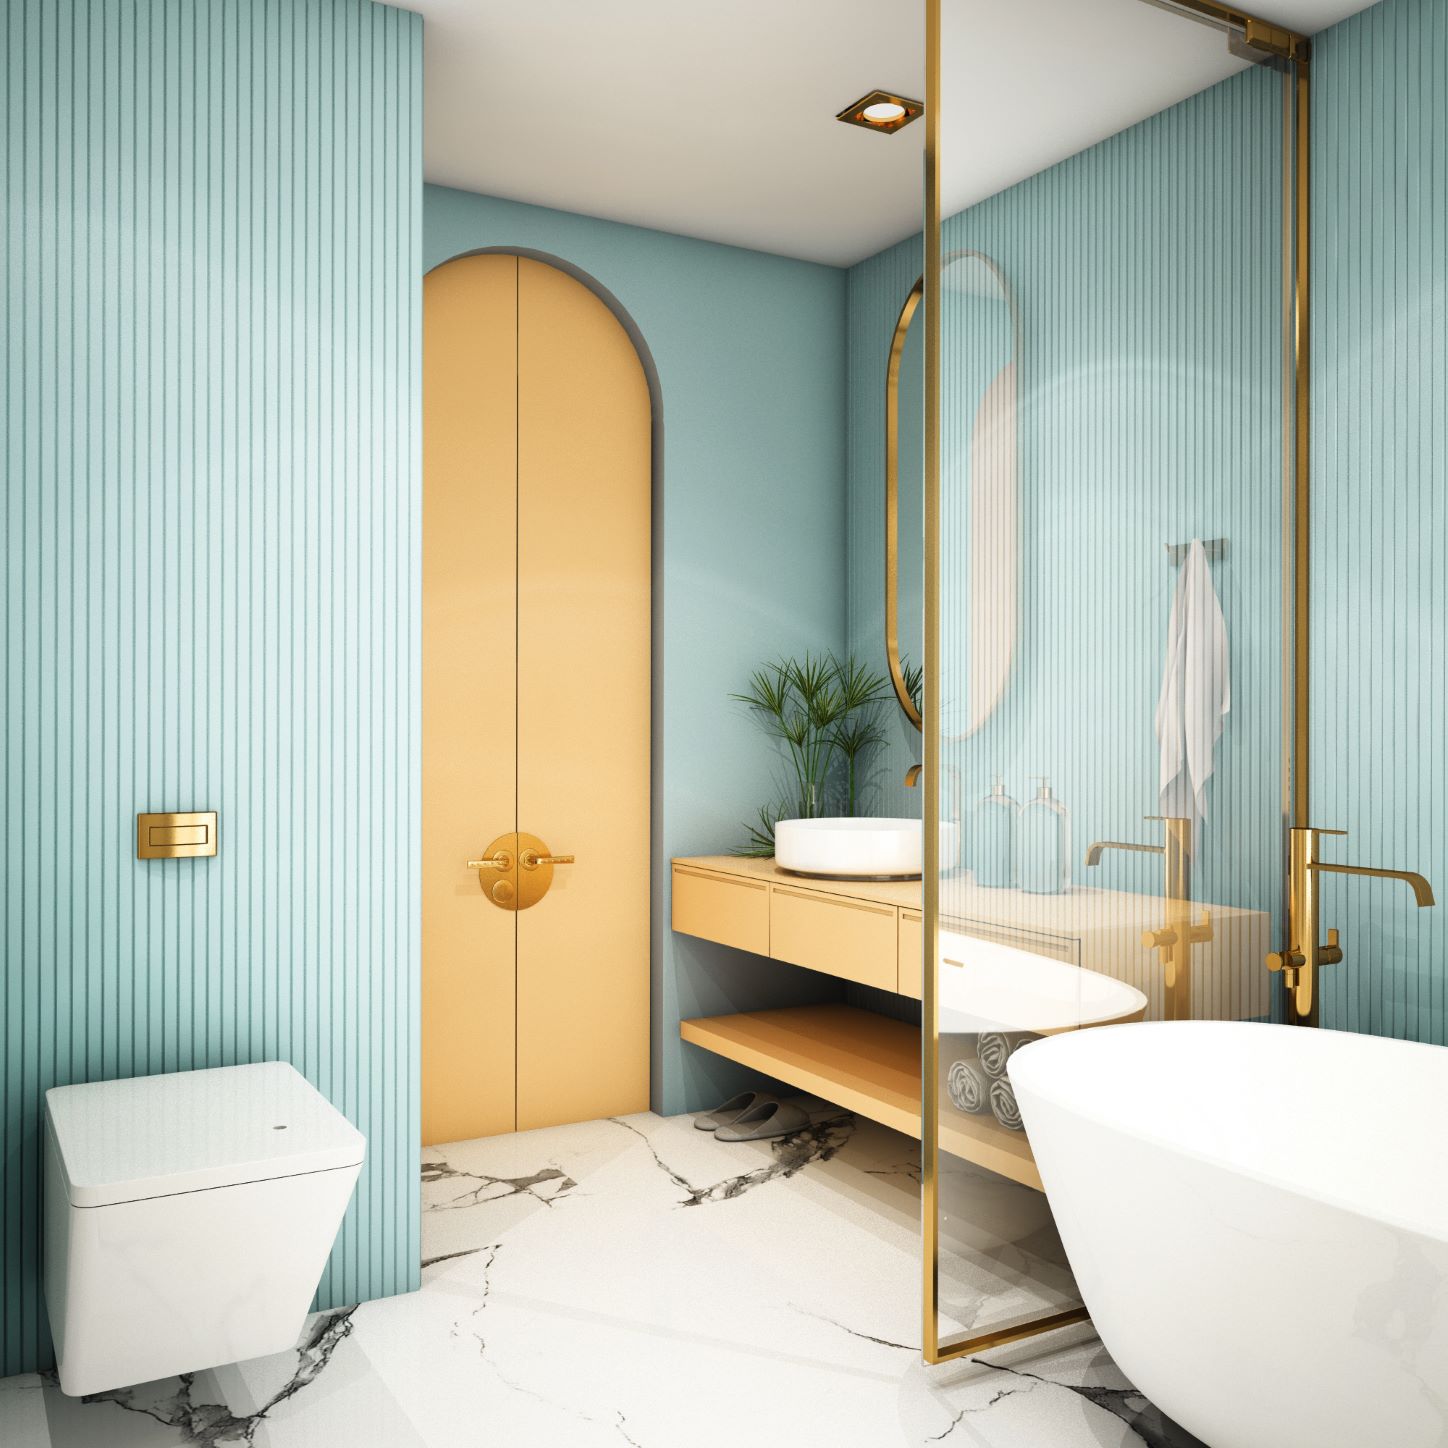 5 Colors That Will Liven Up Your Bathroom And Kitchen Space